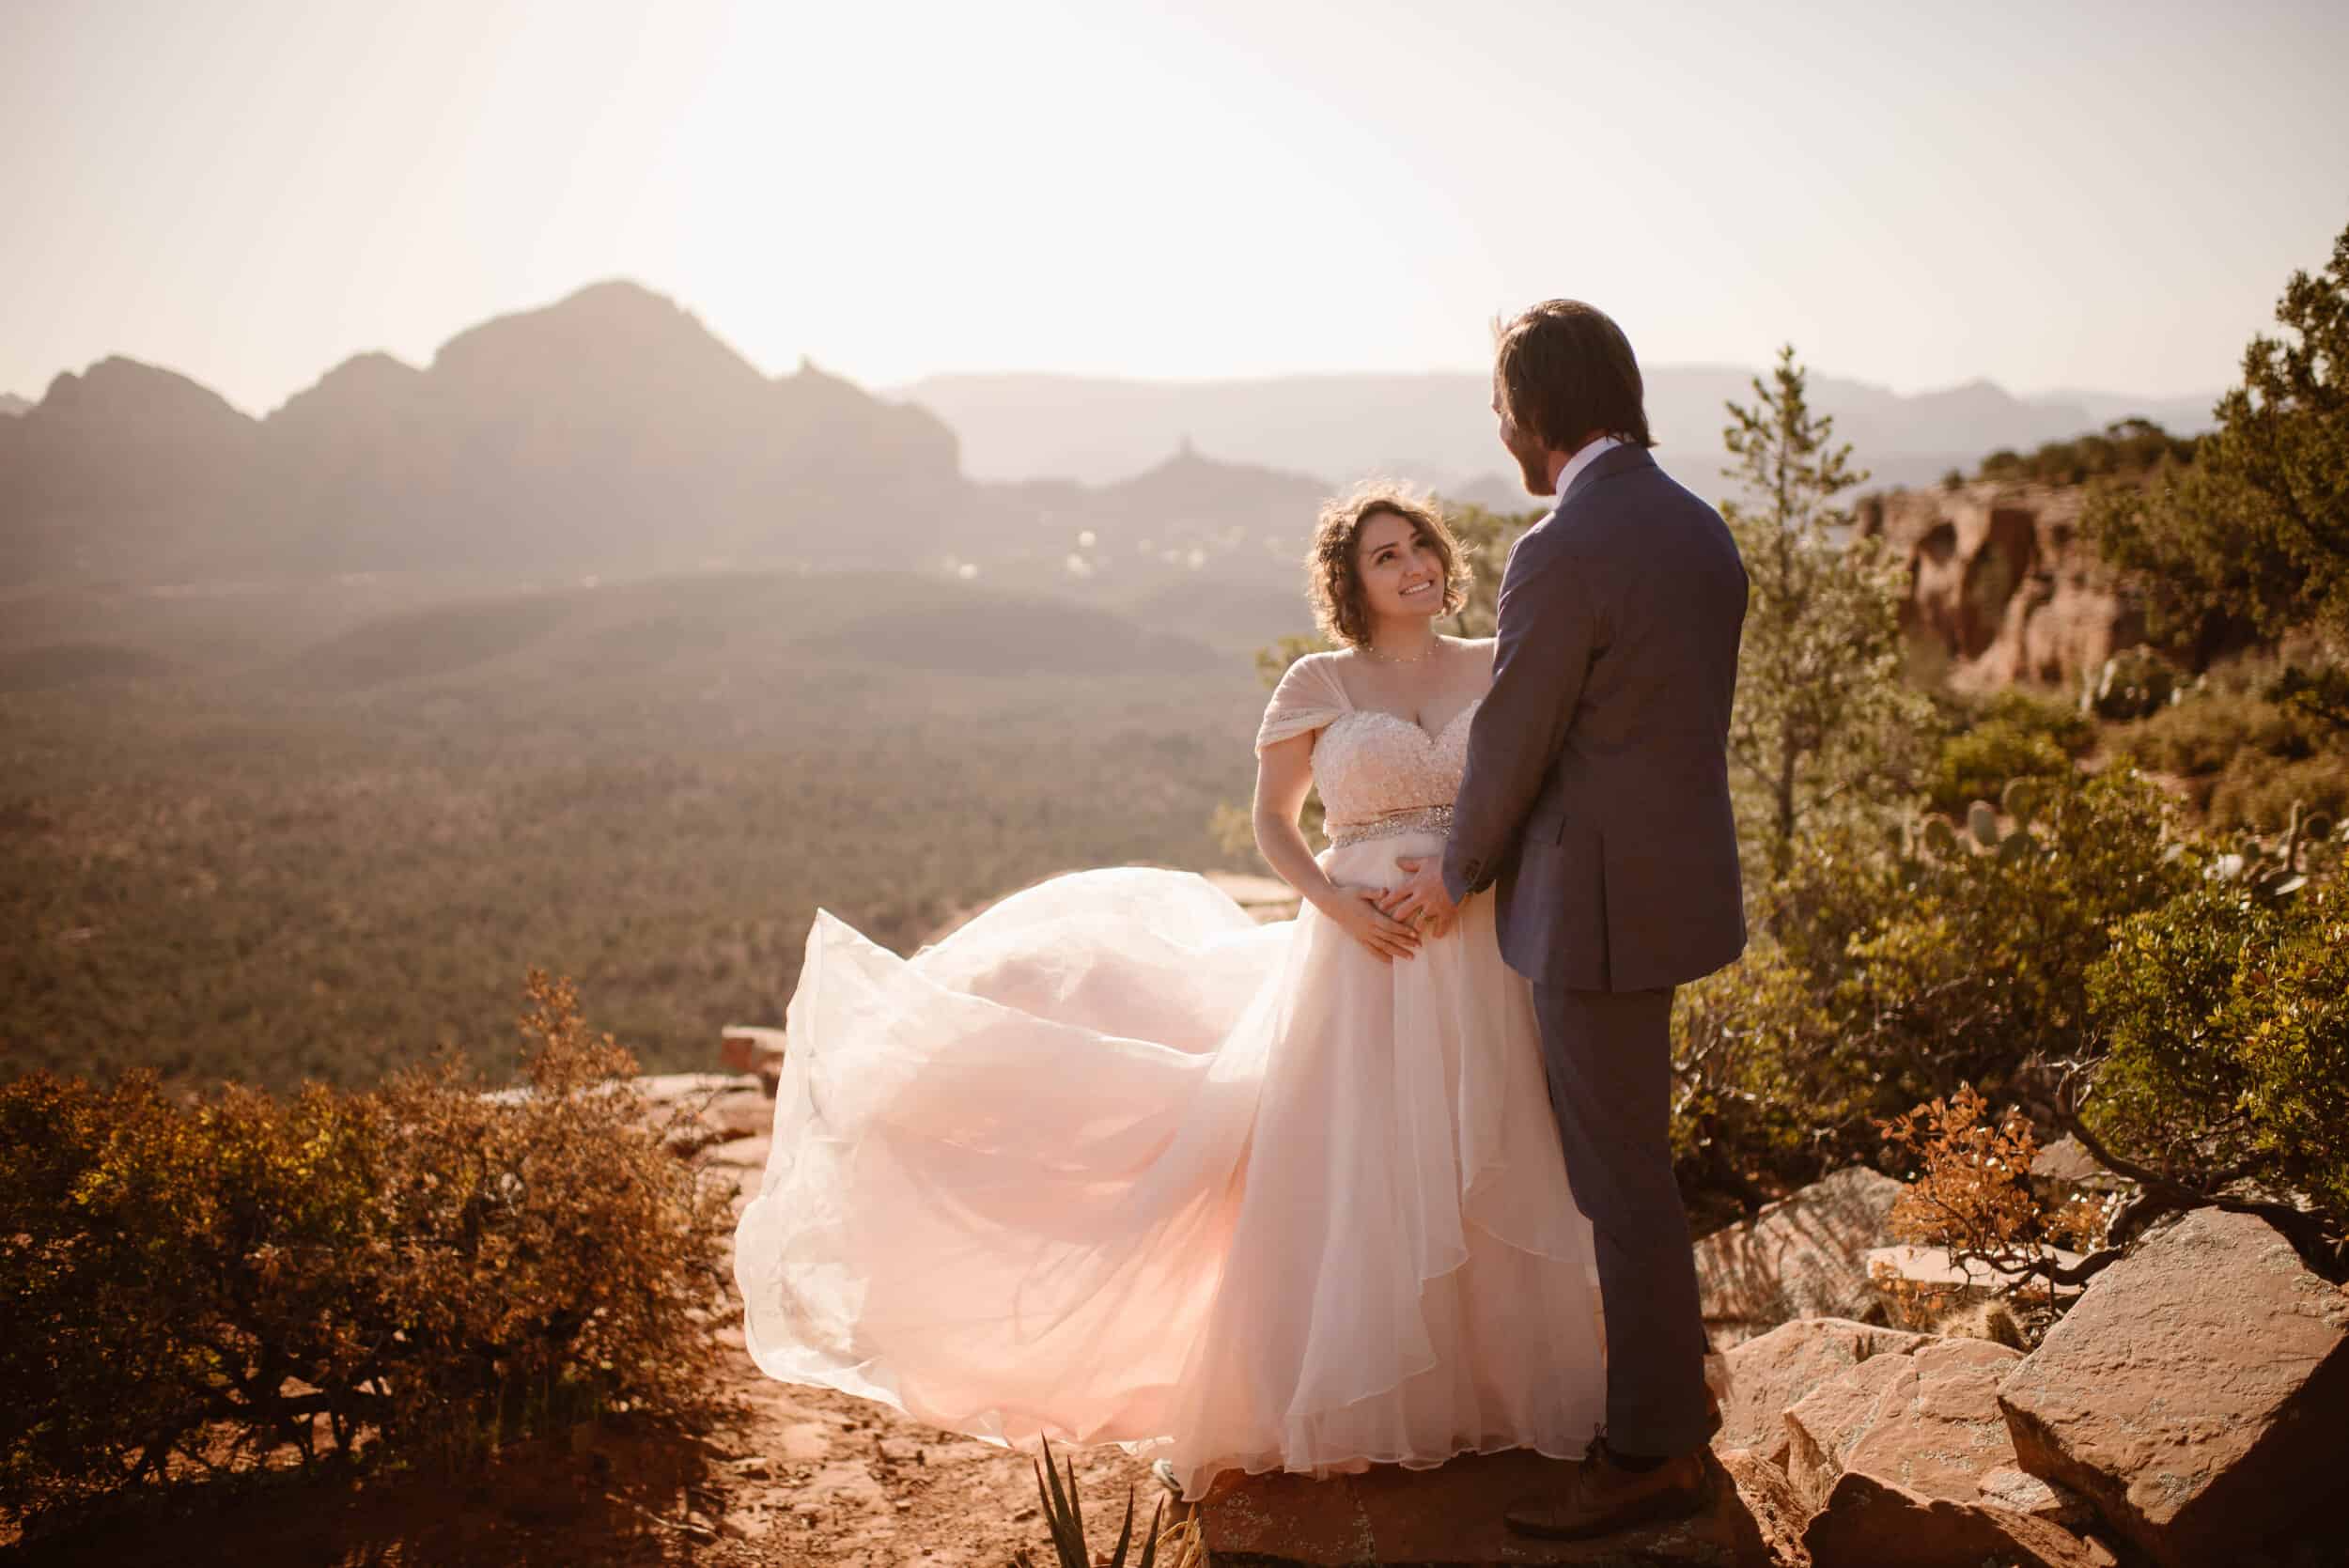 A pregnant bride and groom stand together as the sun rises over the red rocks of Sedona Arizona.